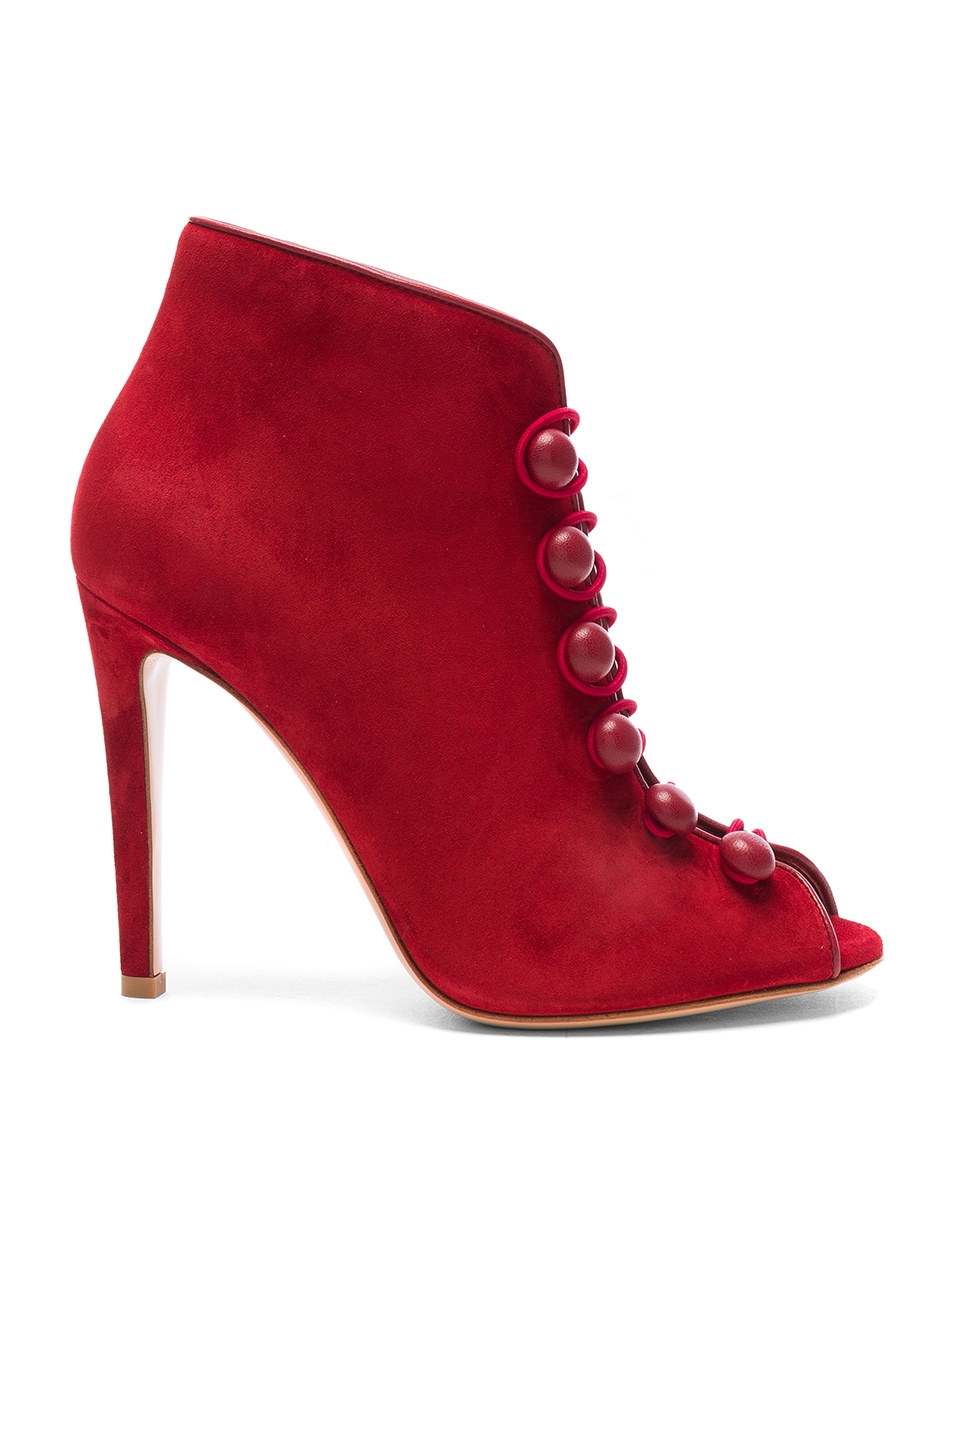 Image 1 of Gianvito Rossi Suede & Leather Booties in Granata